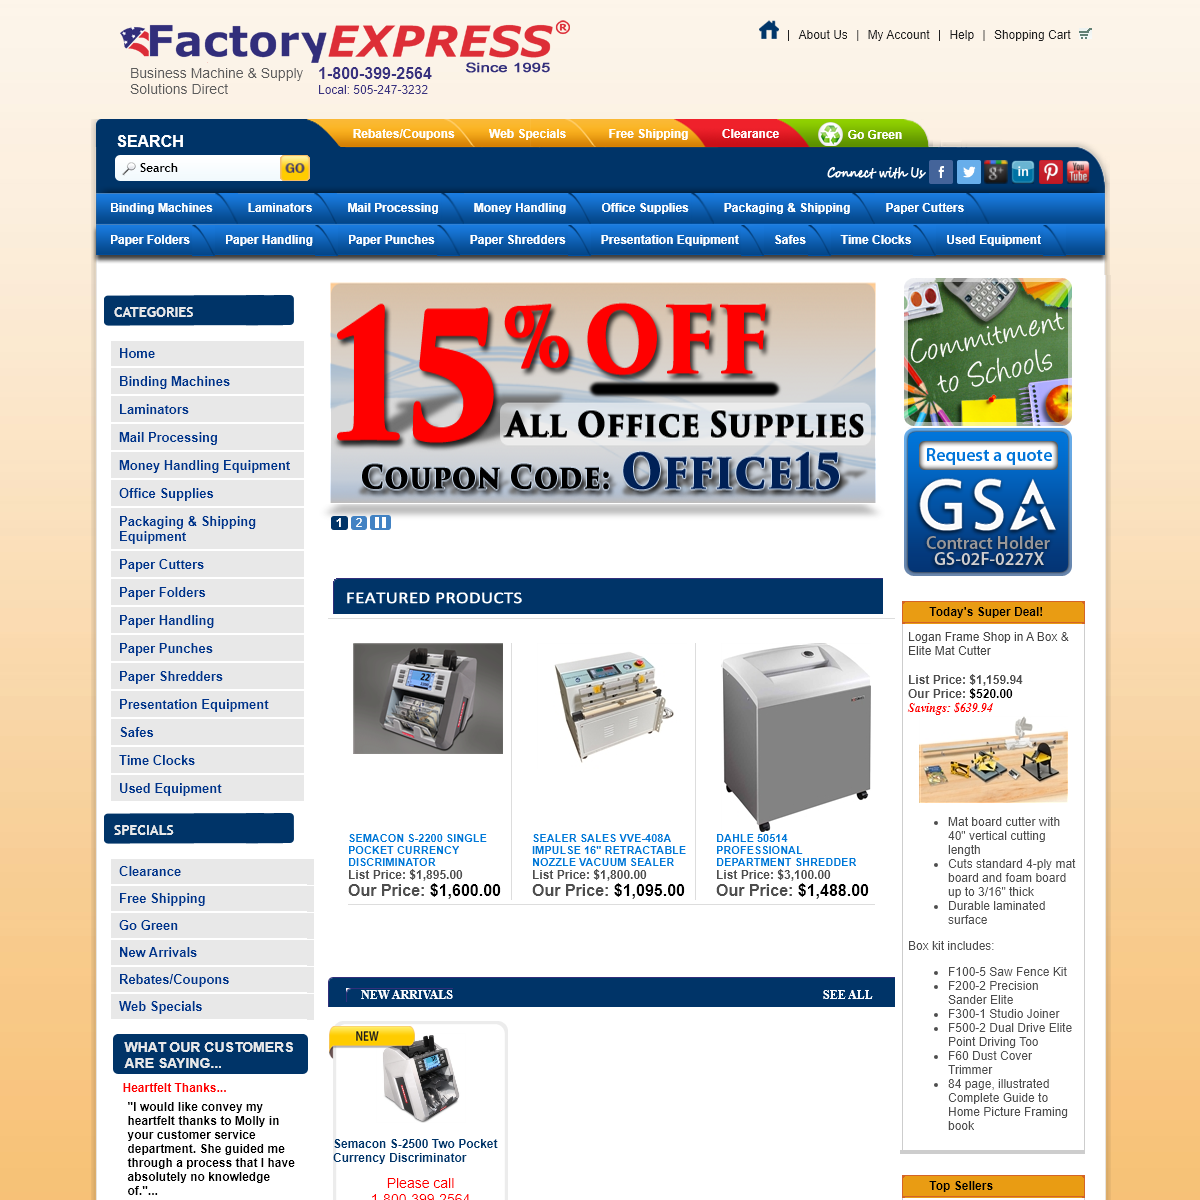 A complete backup of factory-express.com